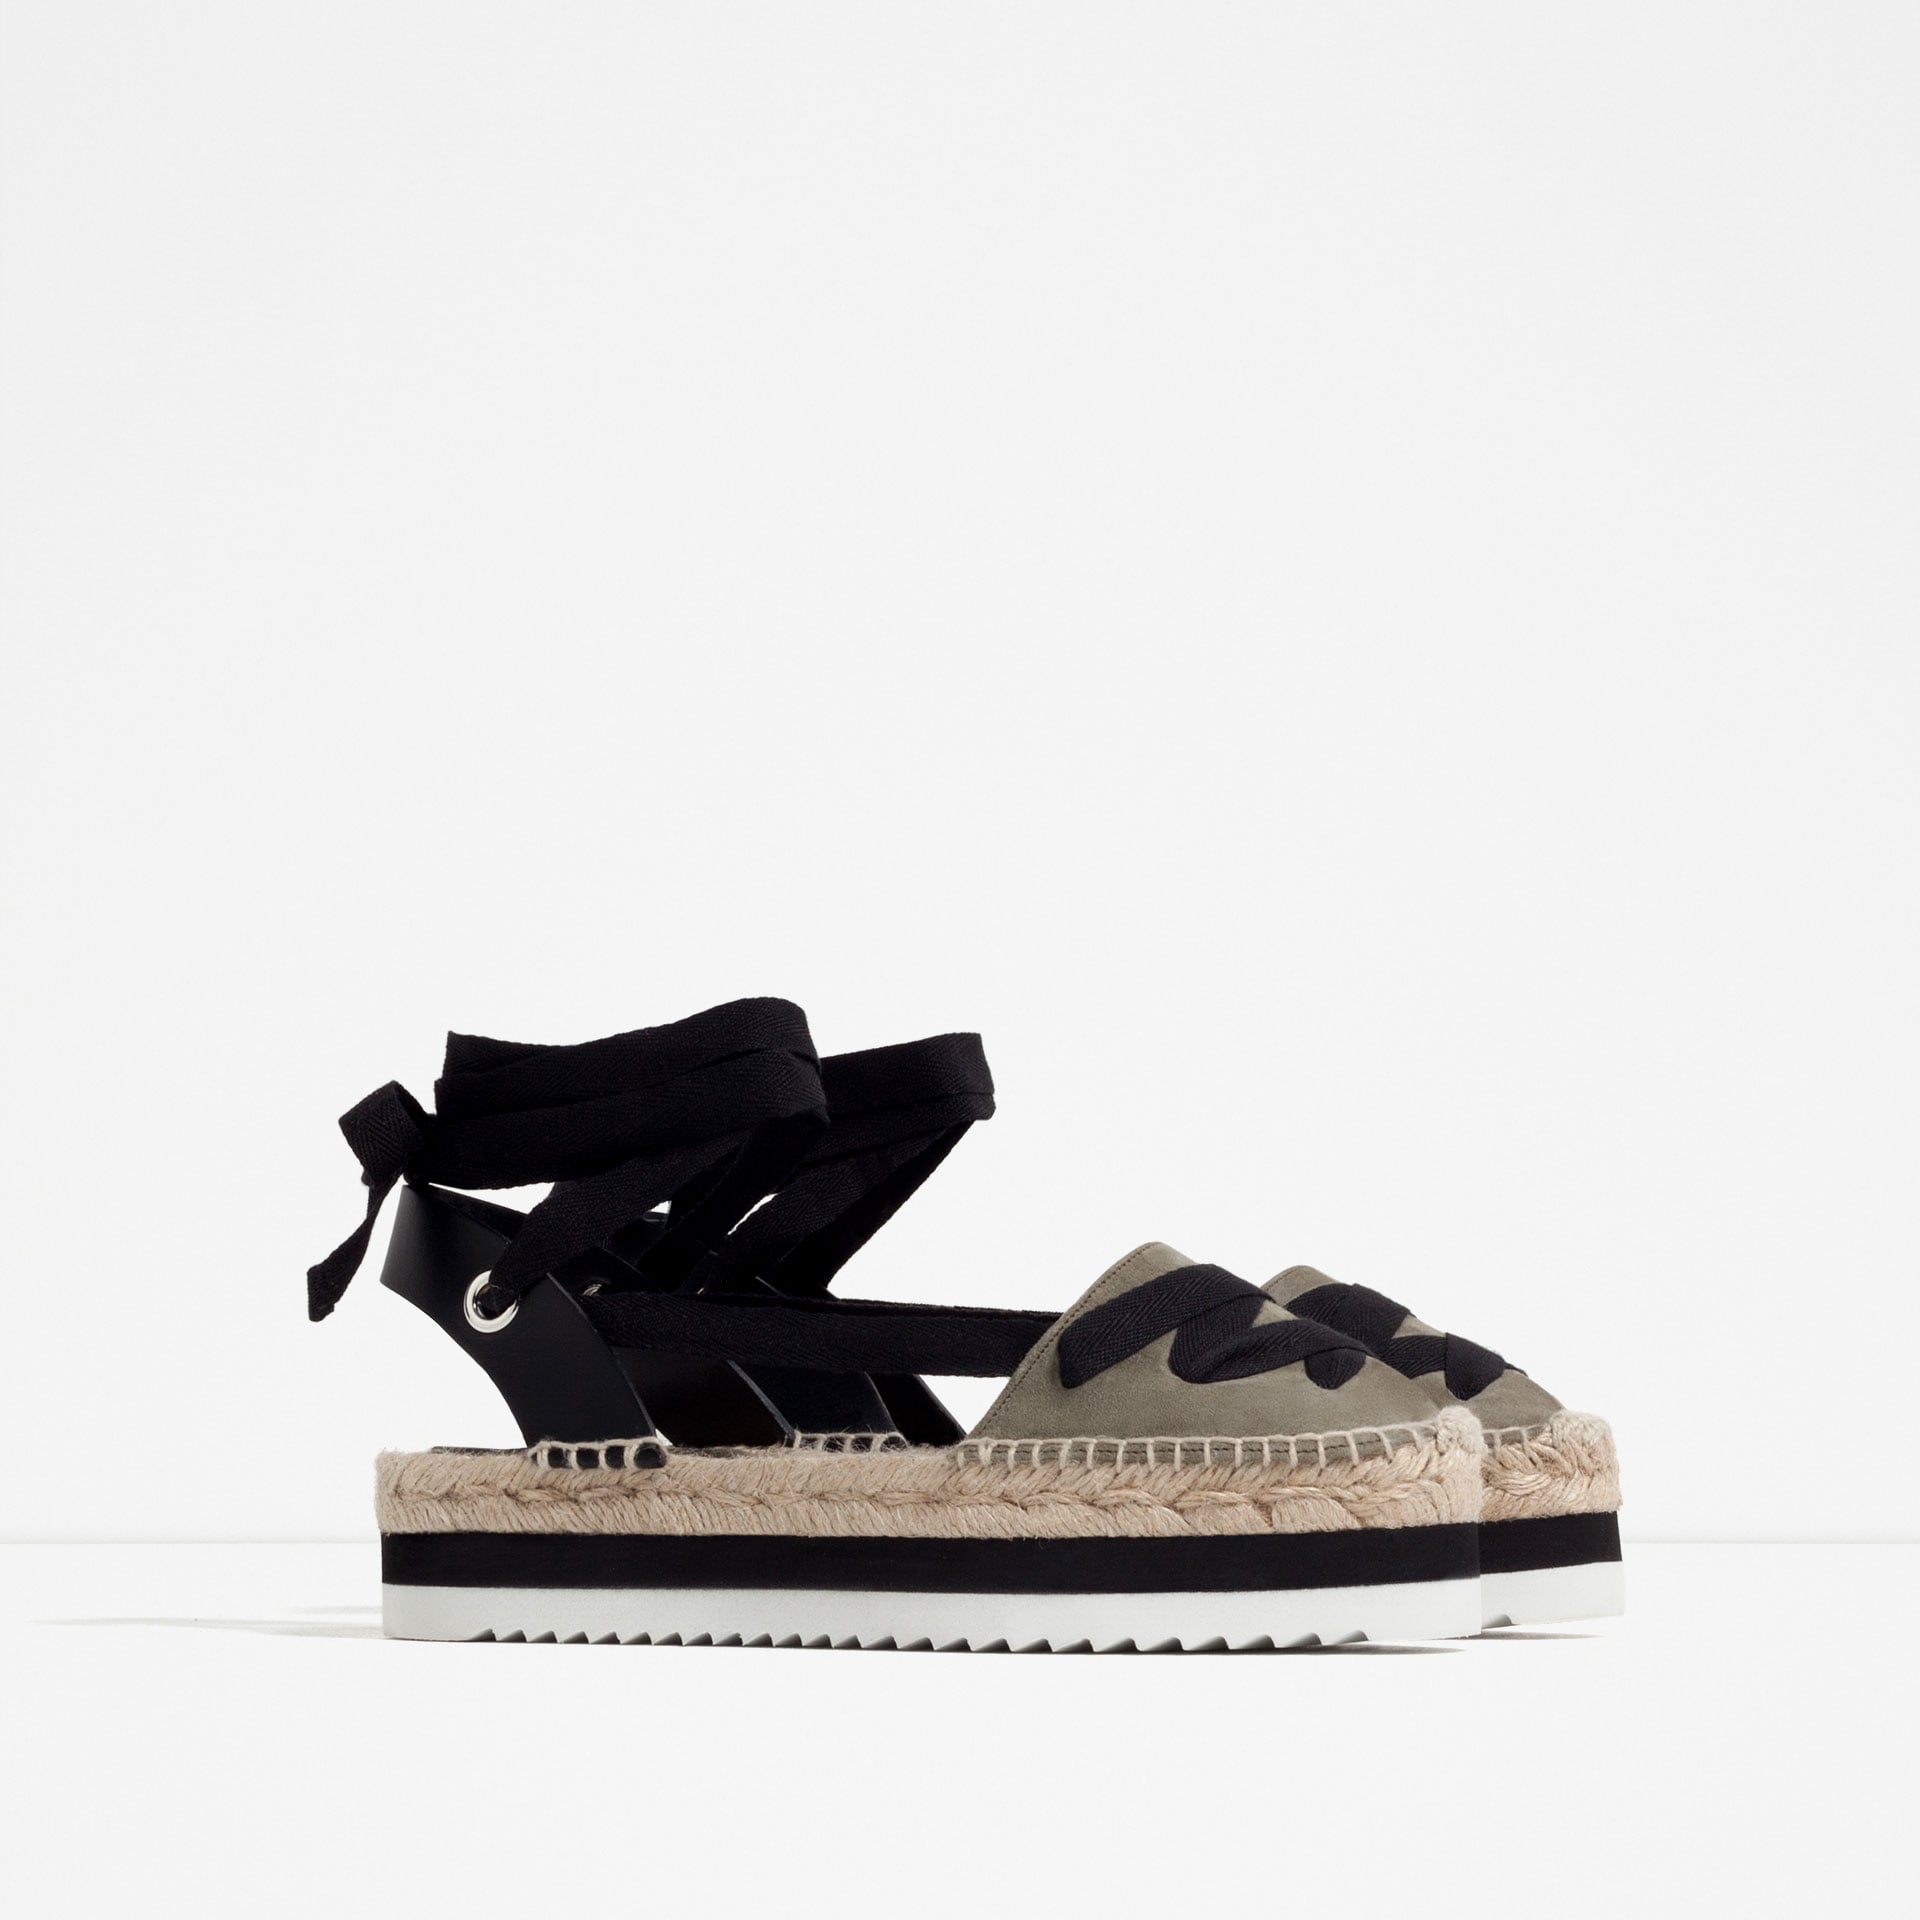 Leather Lace-Up Espadrilles ($70) | The Zara Pieces You'll See Fashion Girls Wearing Everywhere This Summer | POPSUGAR Fashion Photo 18